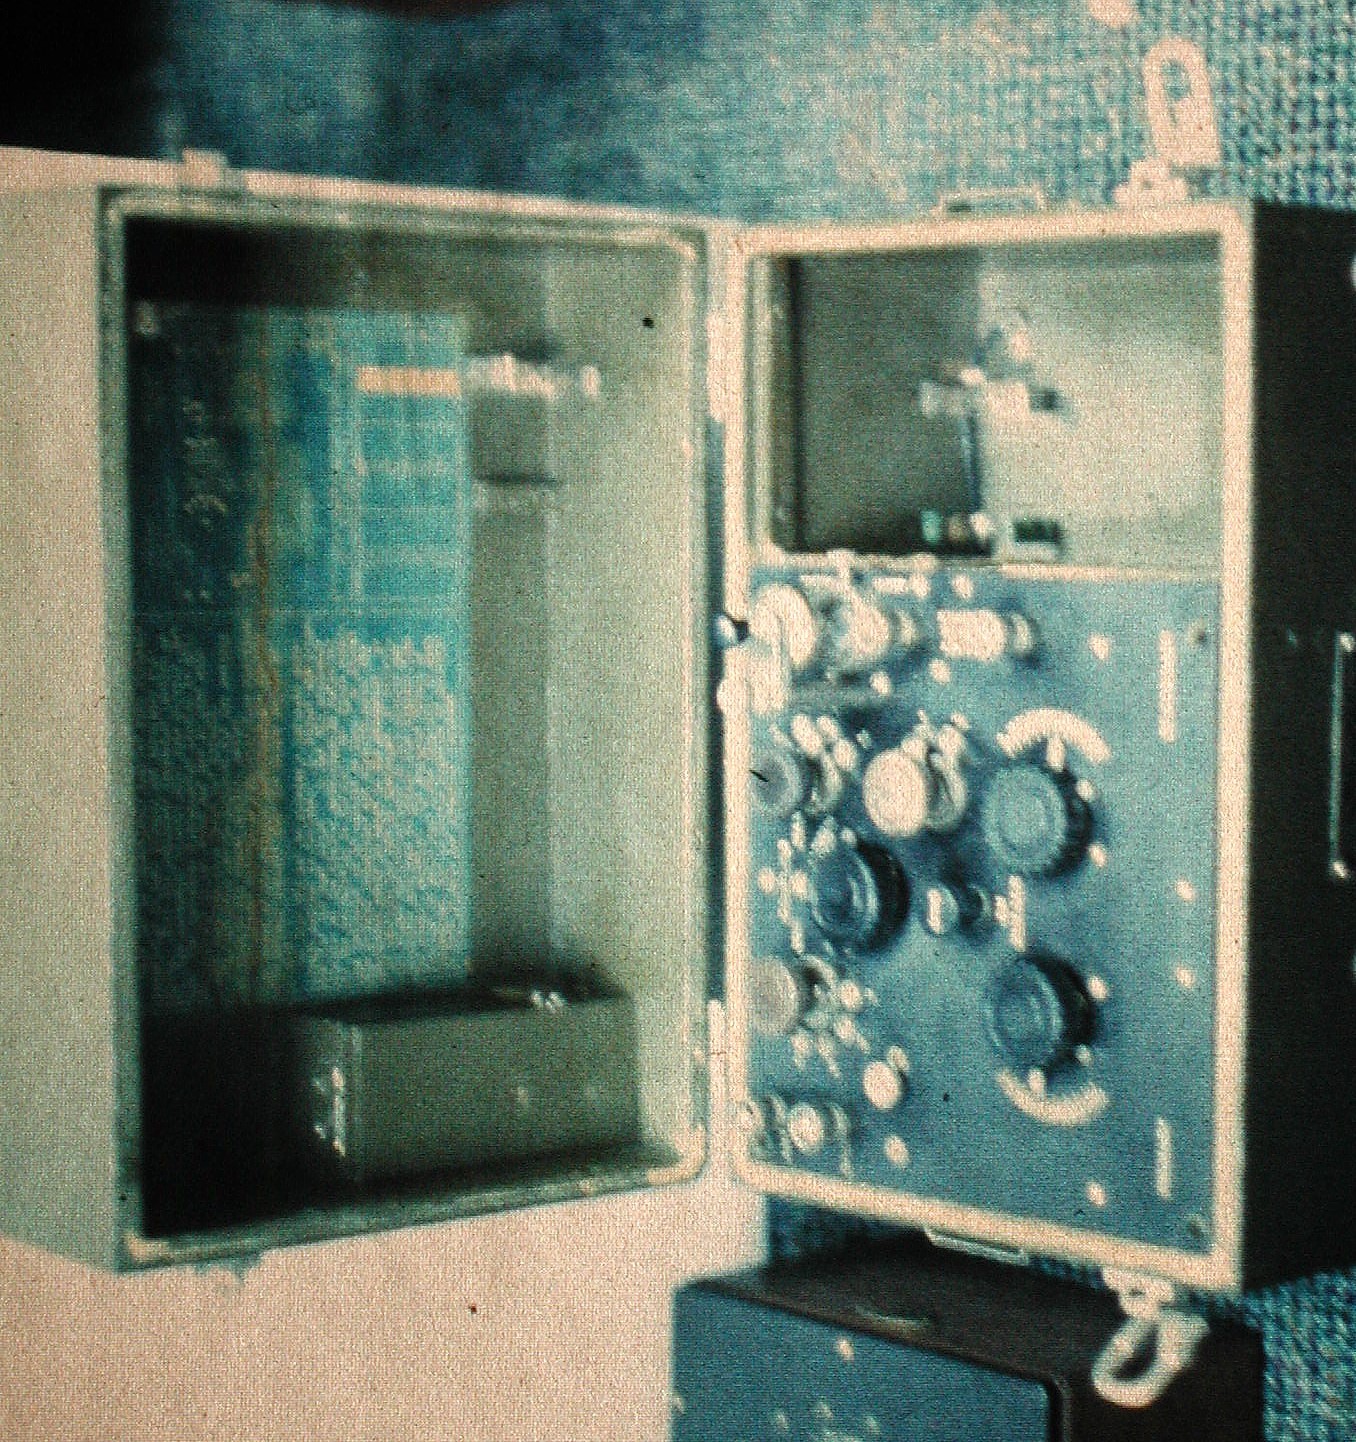 Type BC-14A Receiver